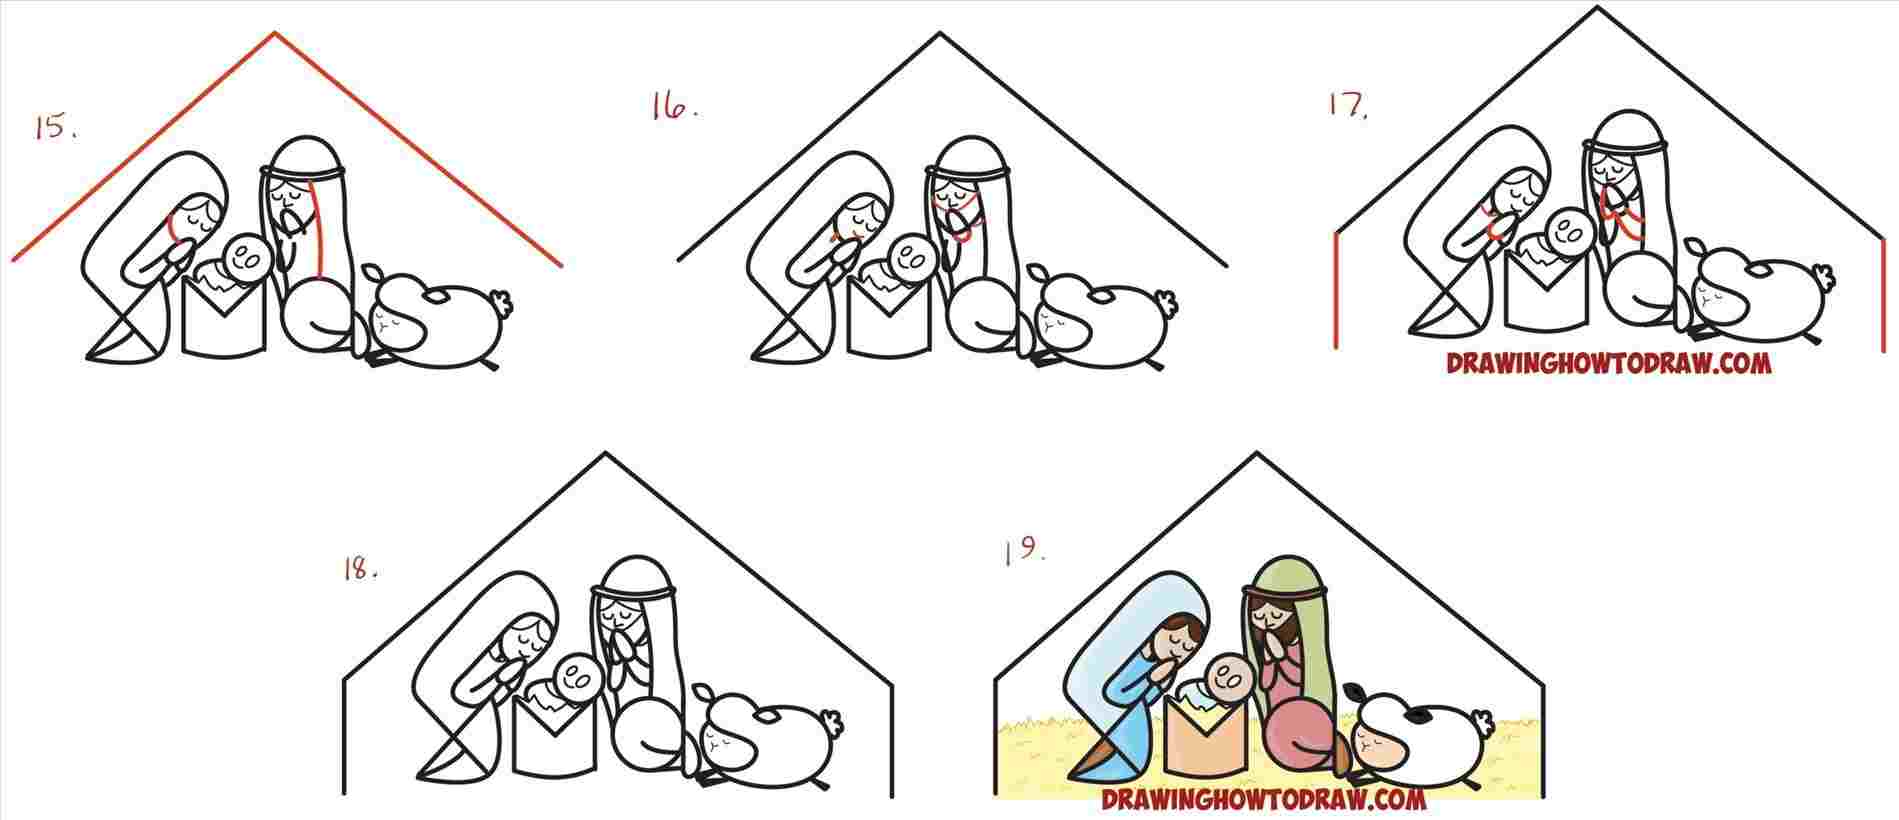 The Nativity Drawing Image